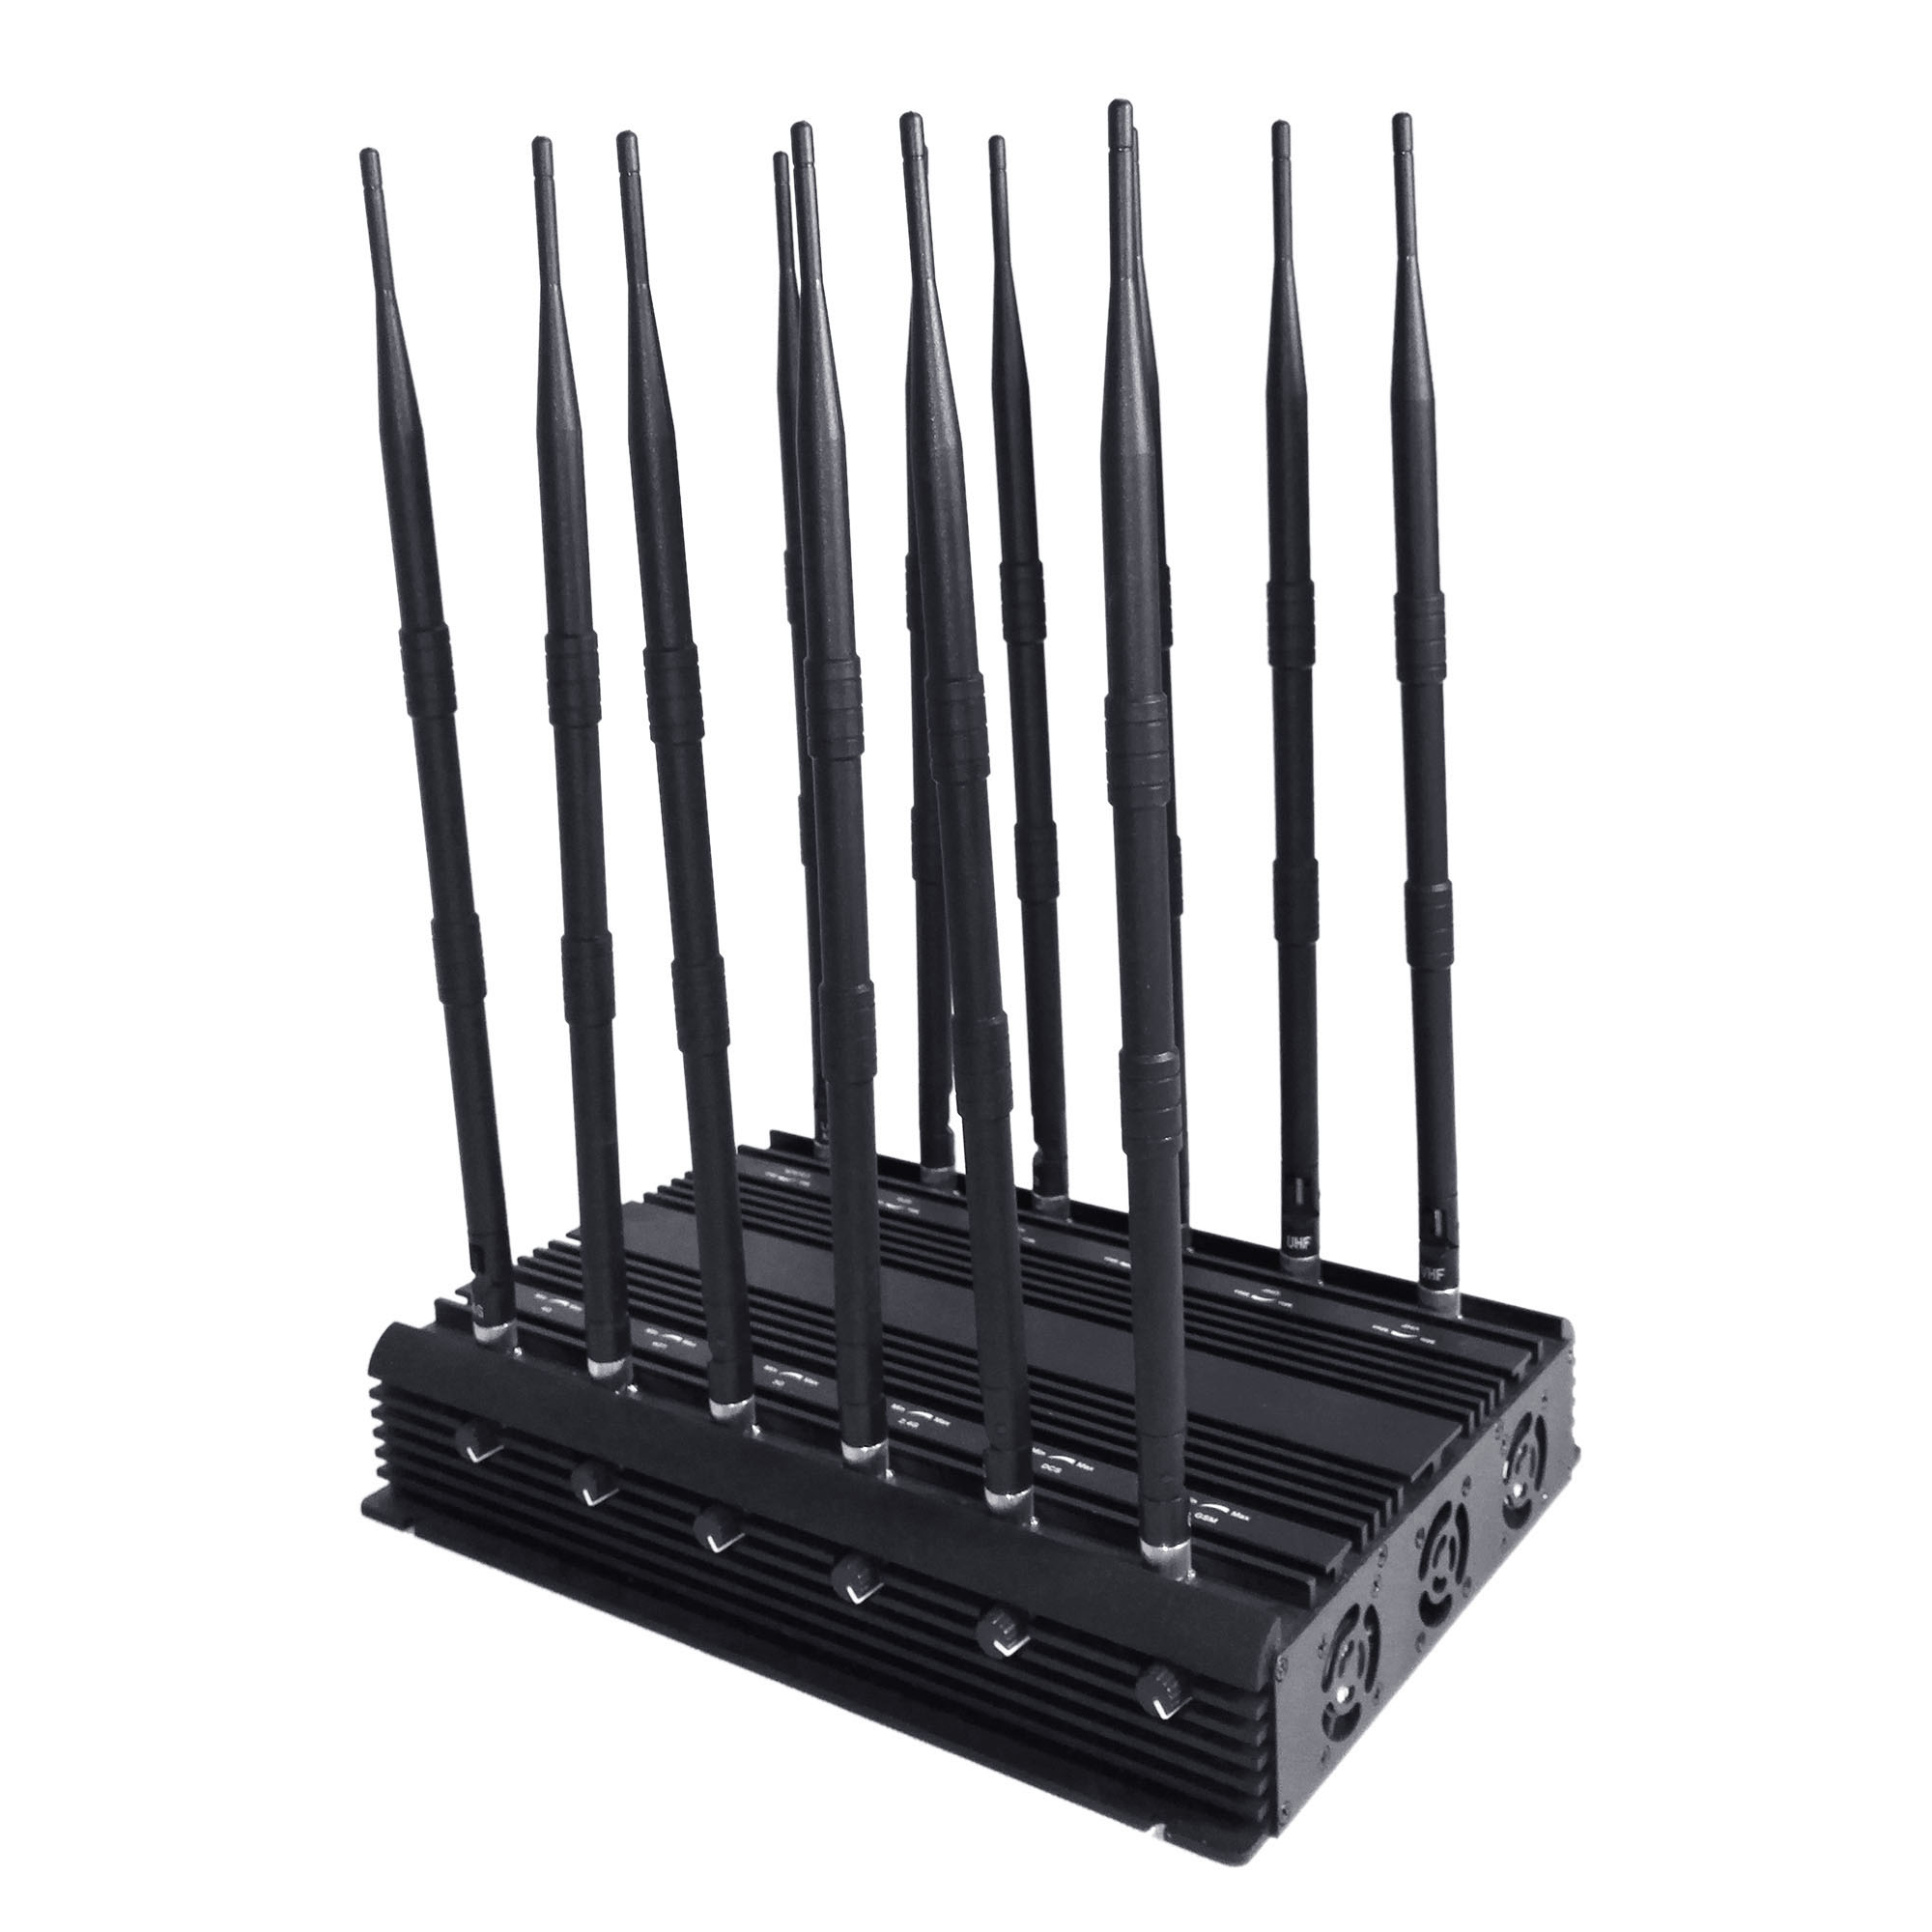 network jammer bd eclipse - 12 Antennas High Power Wireless Cell Phone Jammer For 3G 4G Wi-Fi GPS LOJACK Signal Blockers